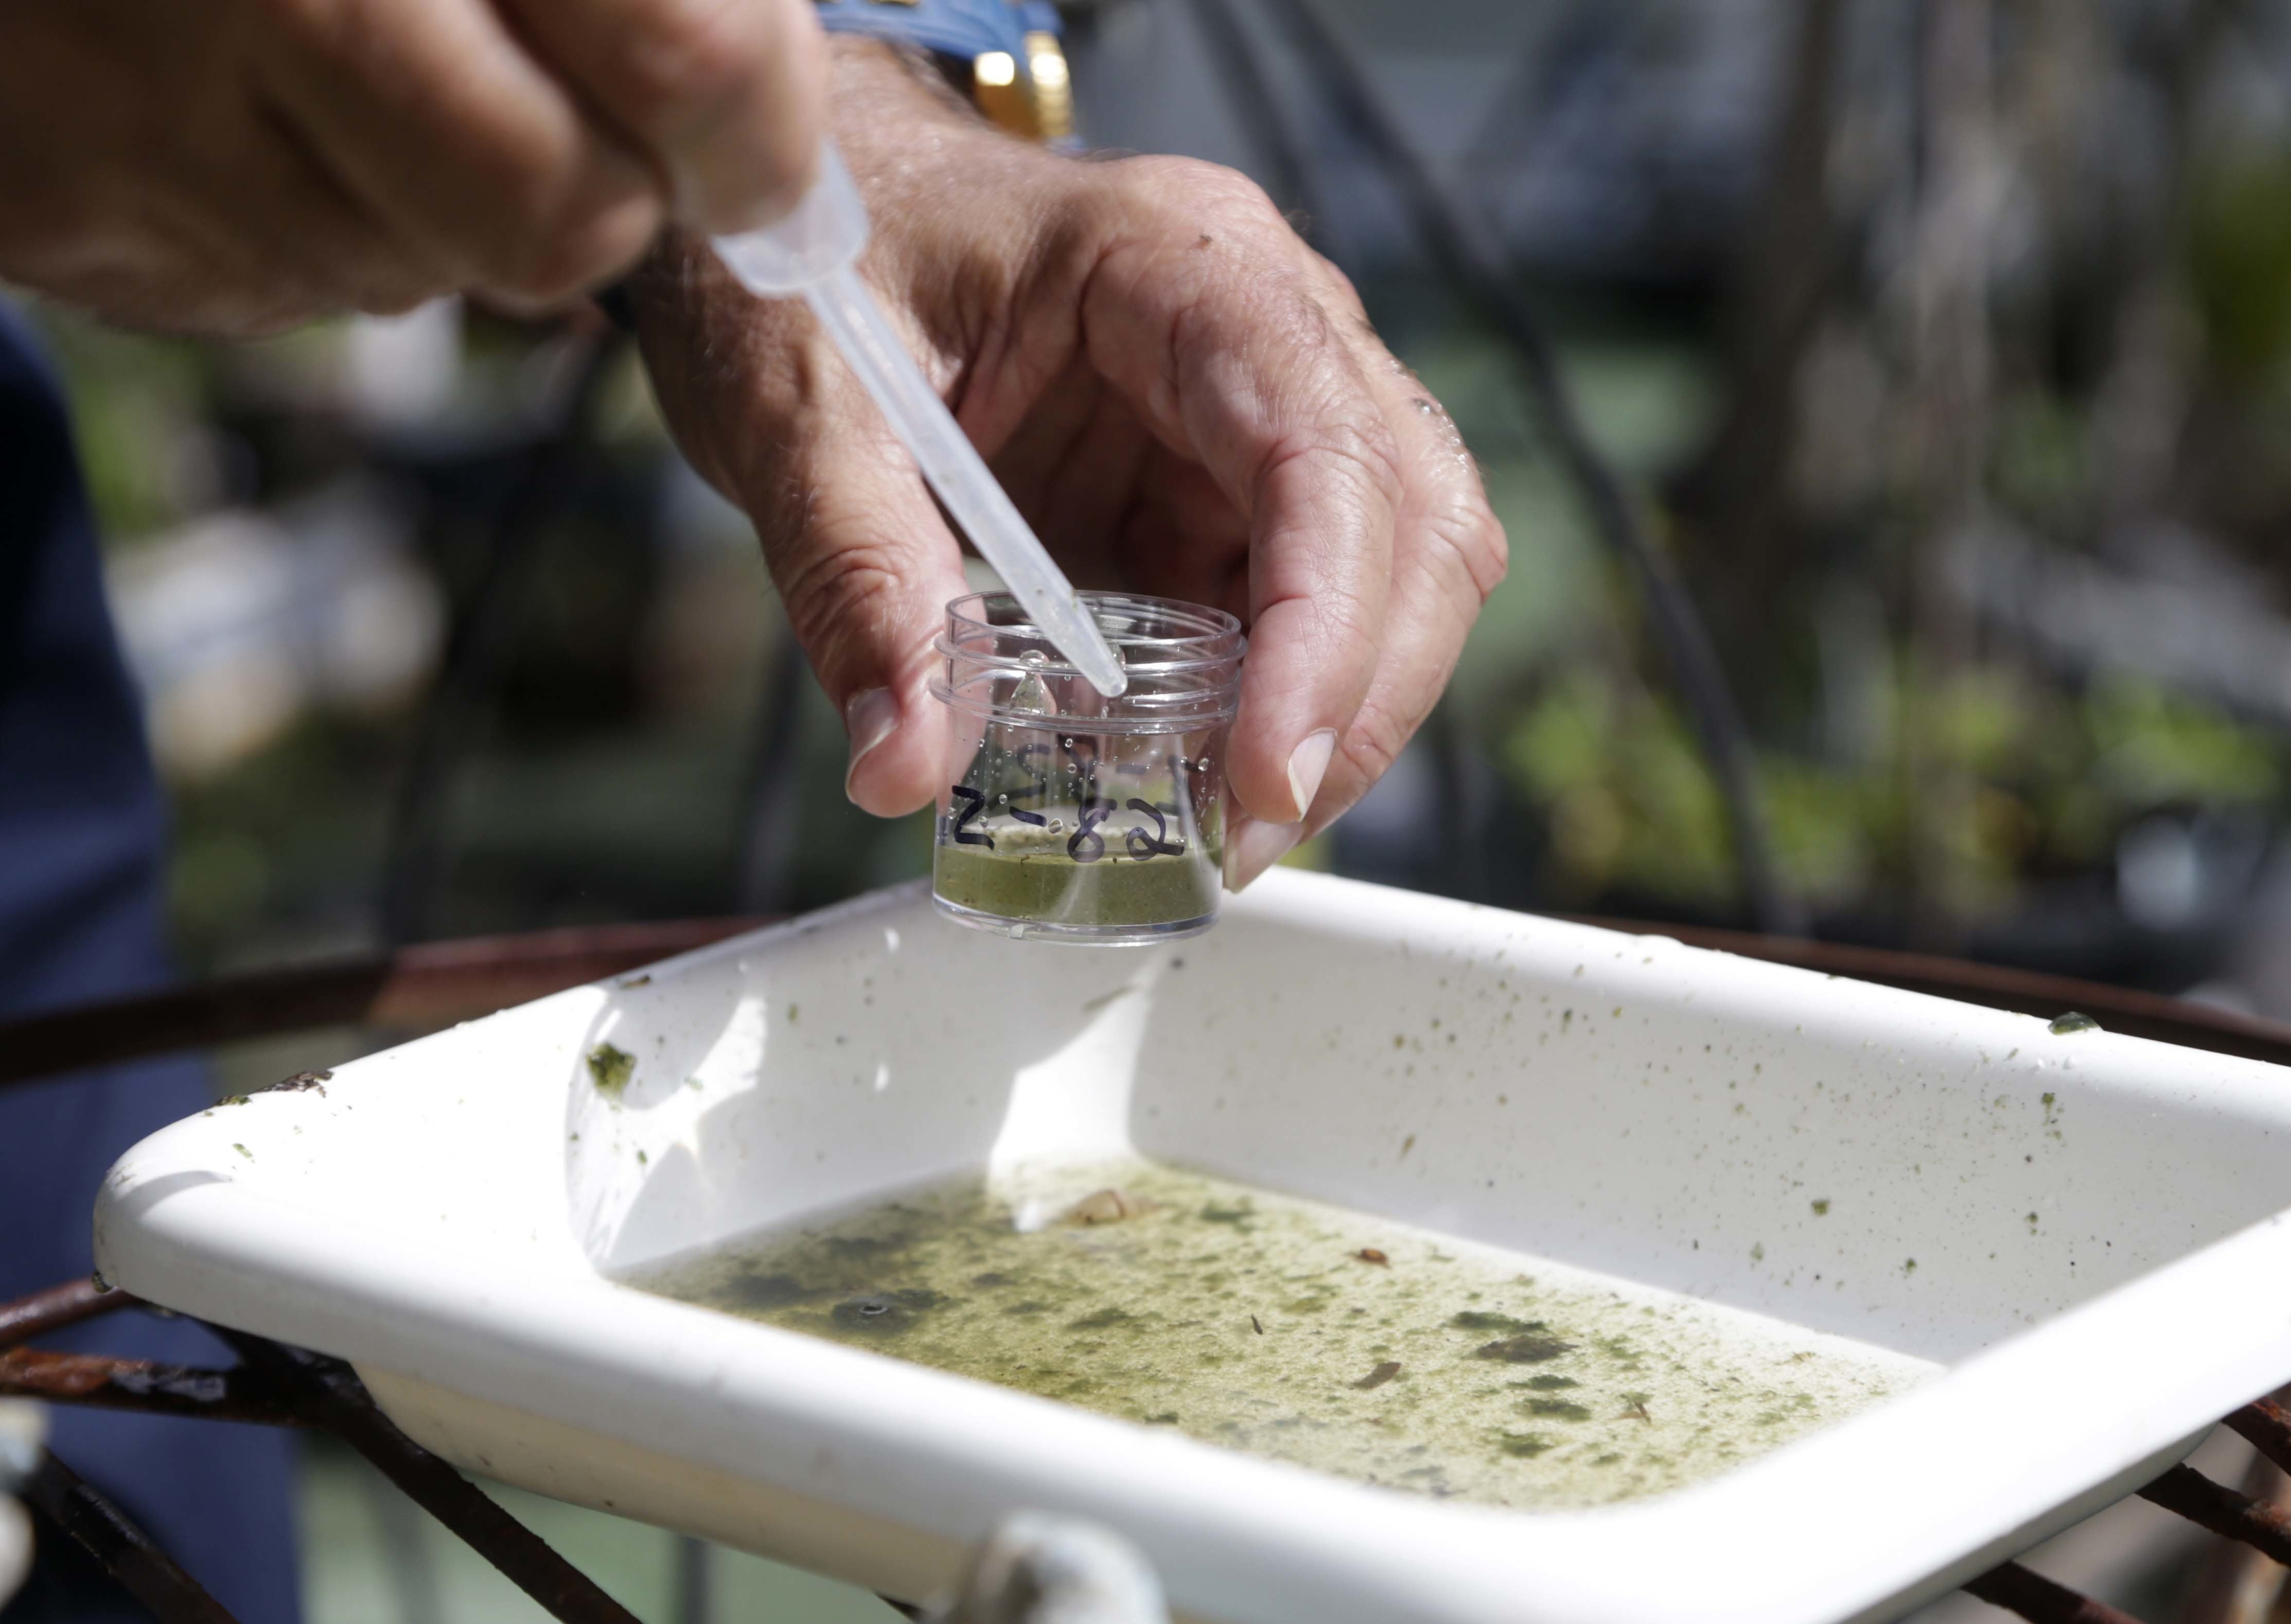 Evaristo Miqueli, a natural resources officer with Broward County Mosquito Control, takes water samples decanted from a watering jug, checking for the presence of mosquito larvae in Pembroke Pines, FL, on June 28, 2016. (Lynne Sladky&mdash;AP)